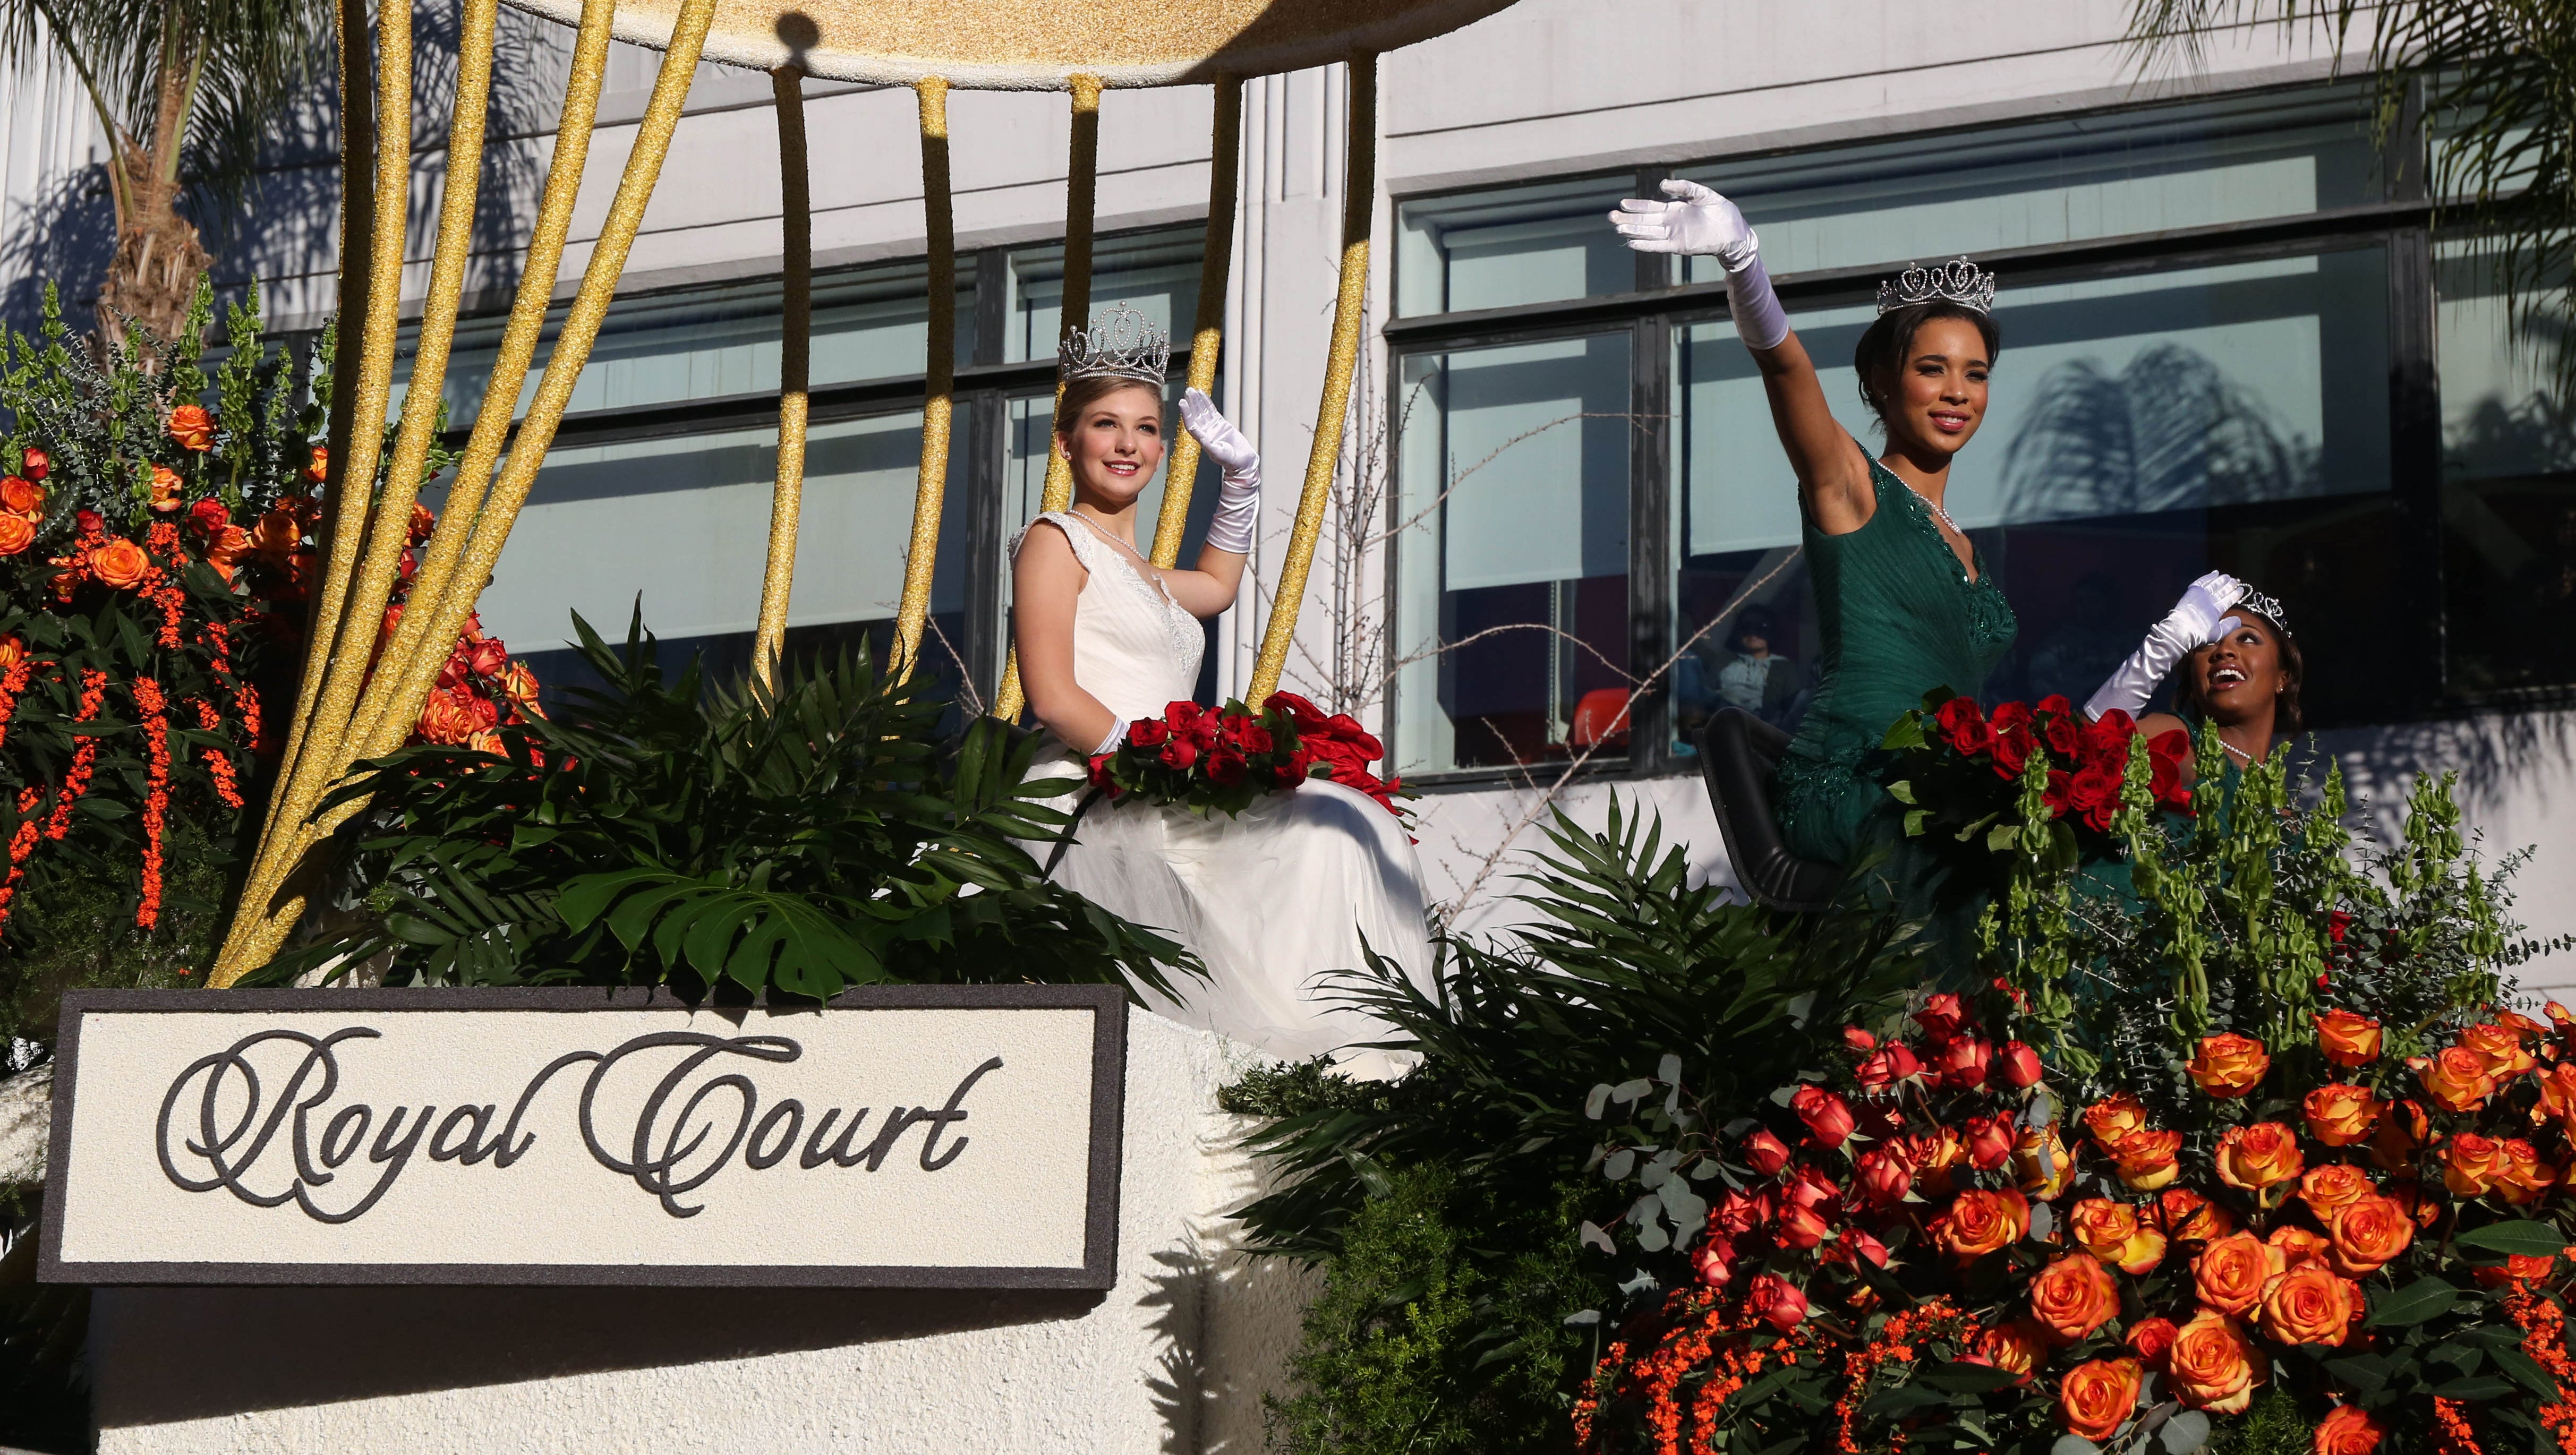 Members of the Royal Court wave to parade goers on Friday, Jan. 1, 2016, during the 2016 Tournament of Roses Parade in Pasadena, Calif.